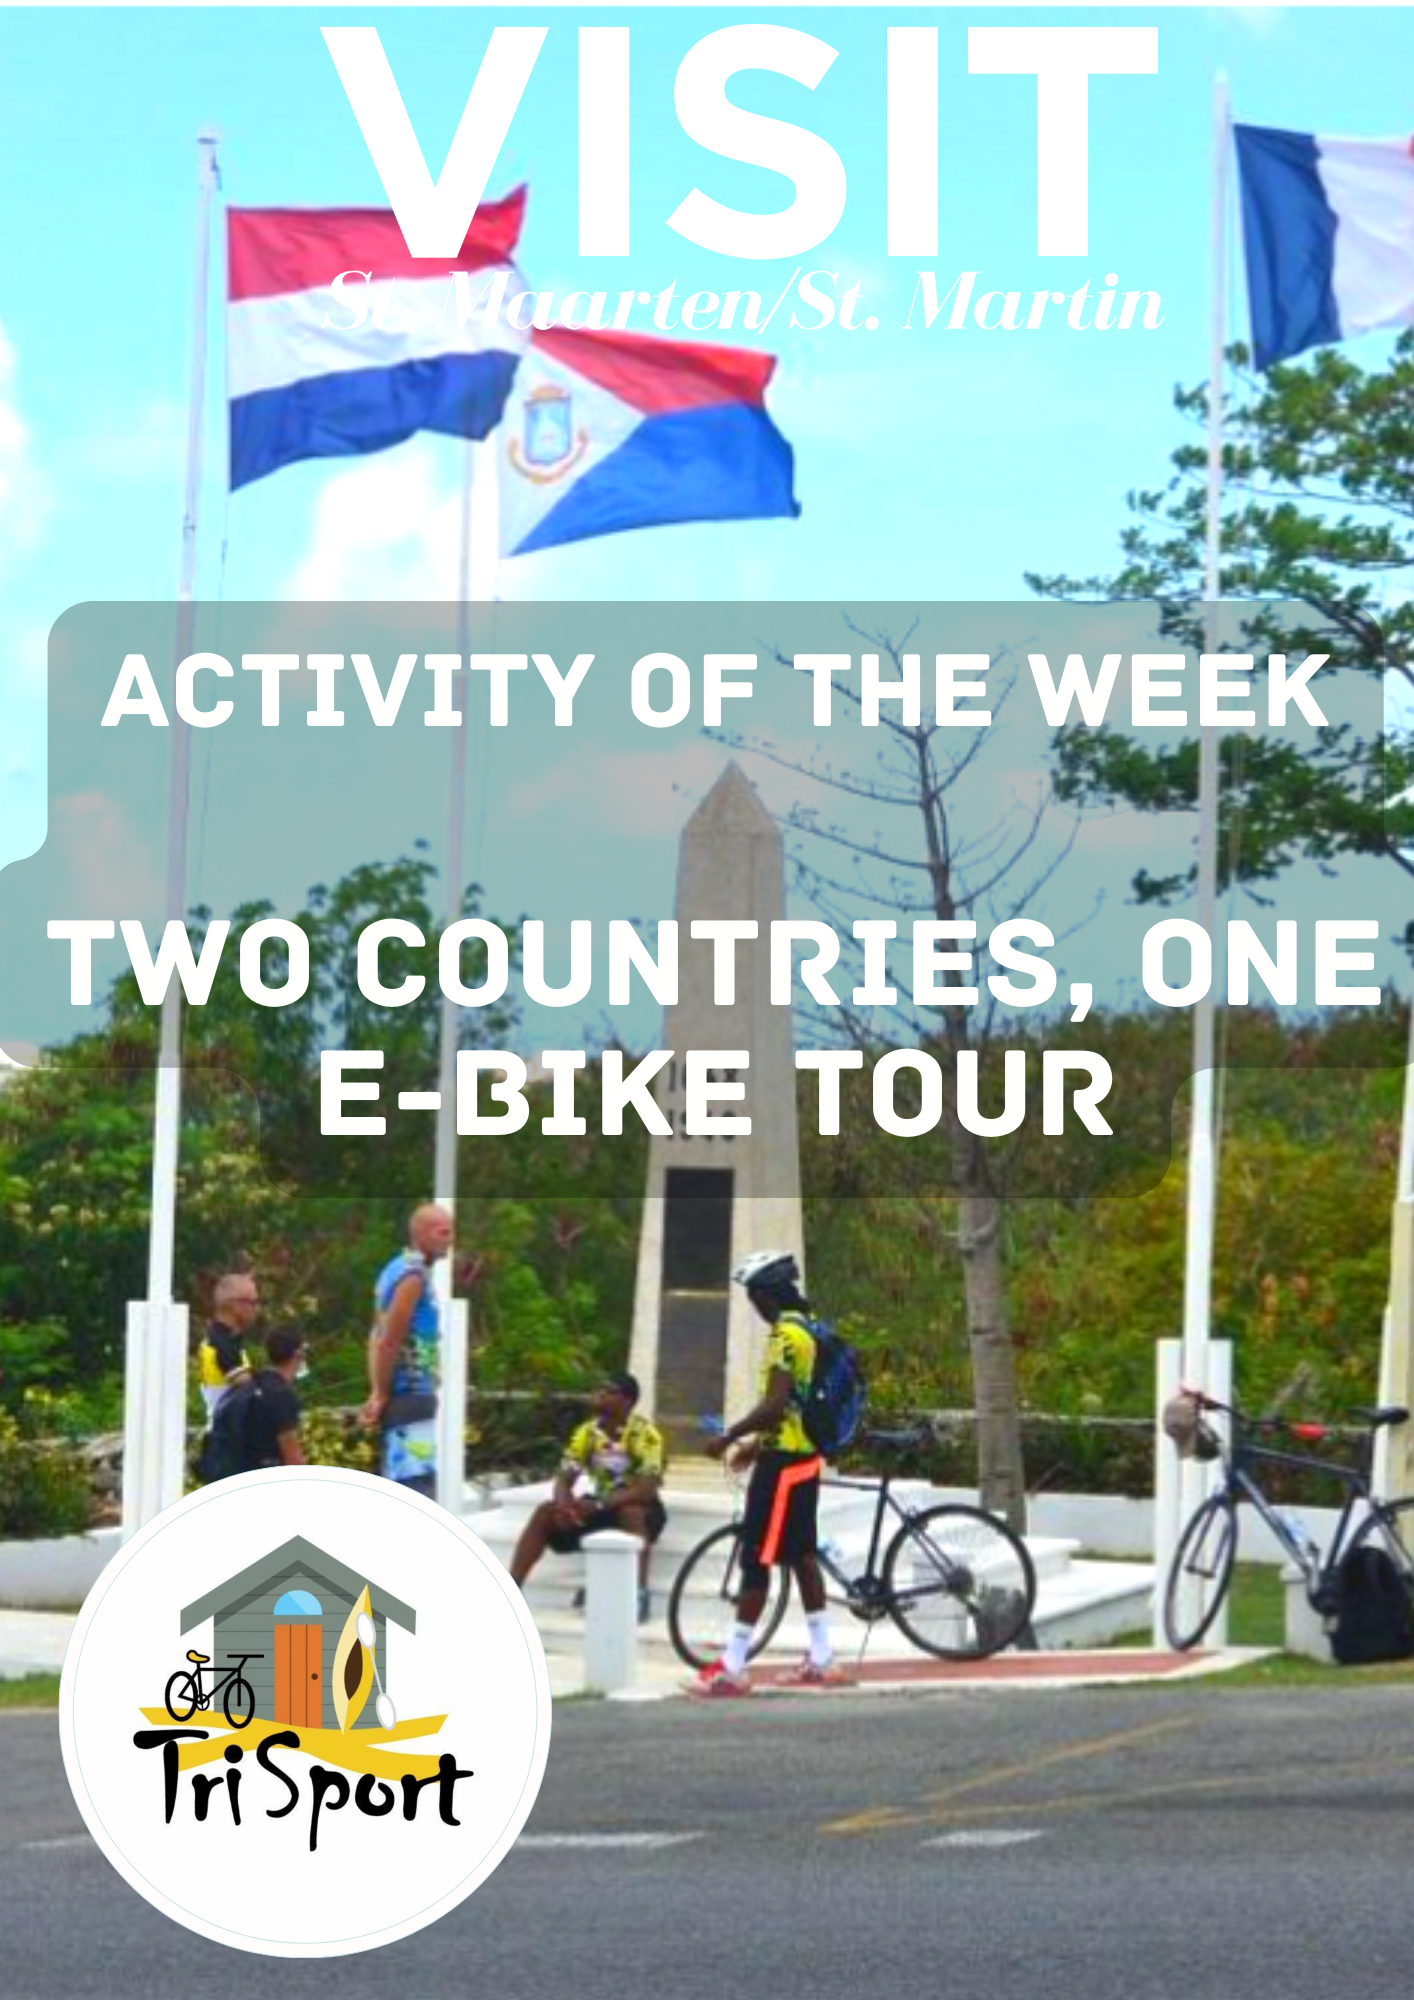 Two countries, one e-bike tour by TriSport St Maarten